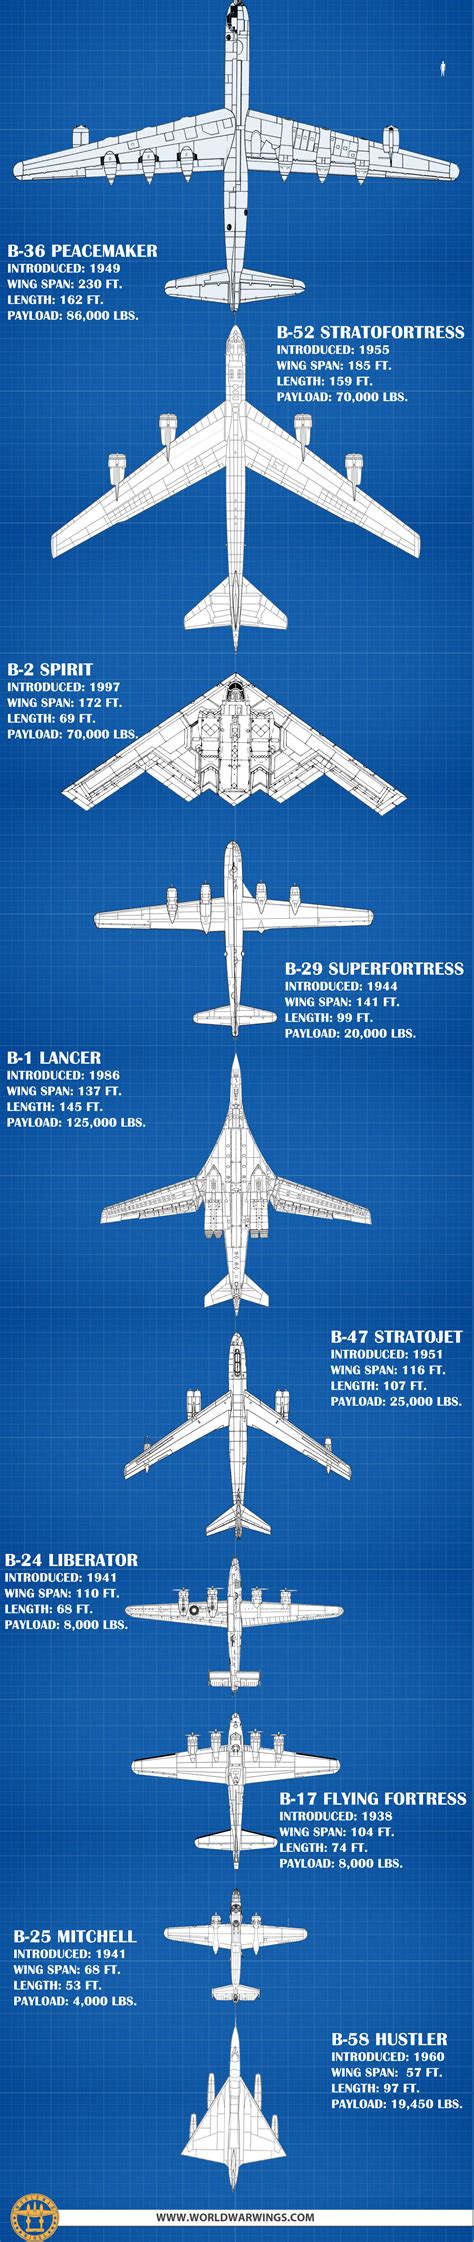 chart comparing bomber sizes    head spin world war wings